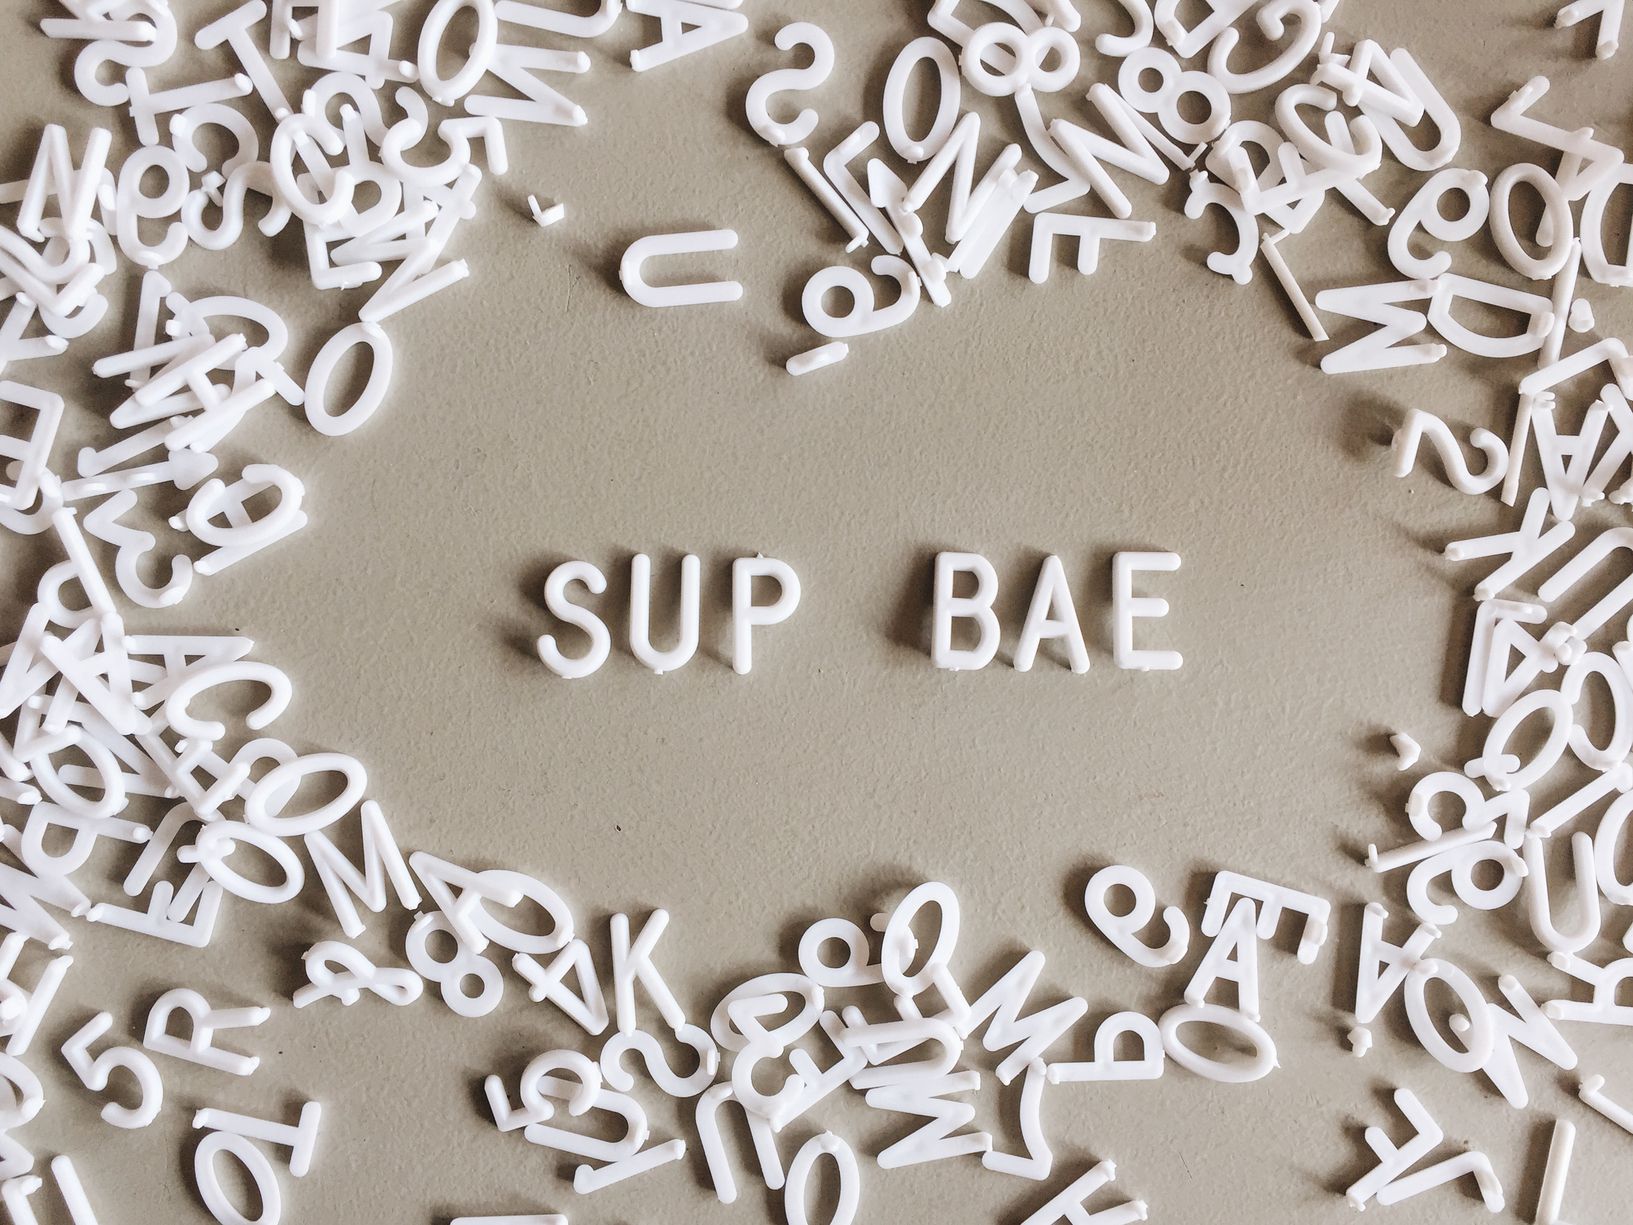 what the meaning of bae